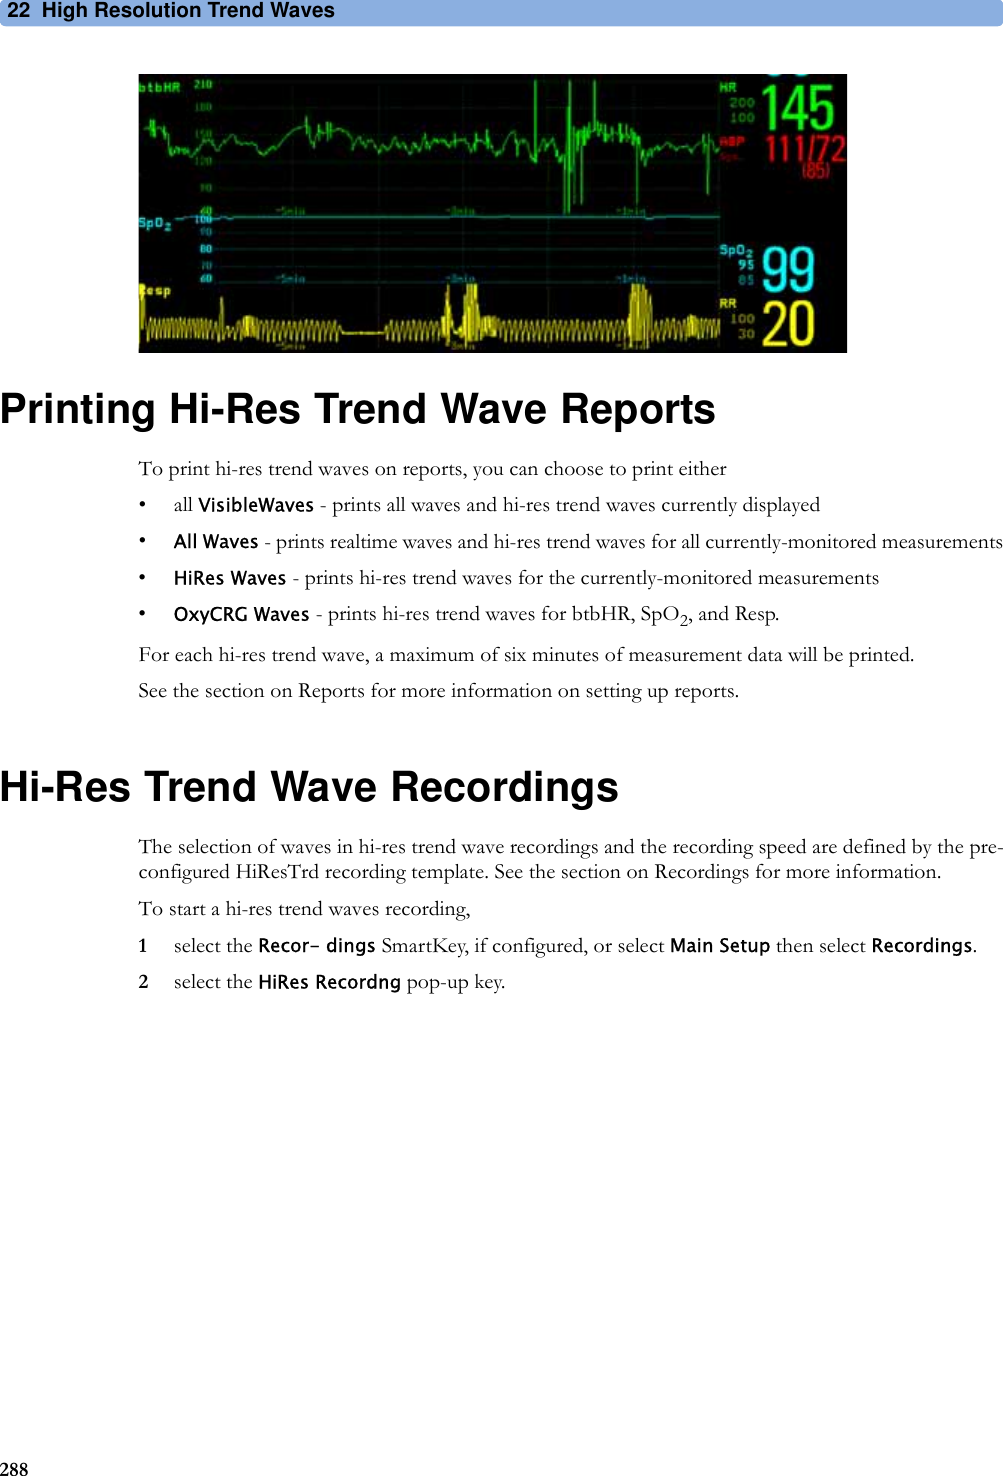 22 High Resolution Trend Waves288Printing Hi-Res Trend Wave ReportsTo print hi-res trend waves on reports, you can choose to print either• all VisibleWaves - prints all waves and hi-res trend waves currently displayed•All Waves - prints realtime waves and hi-res trend waves for all currently-monitored measurements•HiRes Waves - prints hi-res trend waves for the currently-monitored measurements•OxyCRG Waves - prints hi-res trend waves for btbHR, SpO2, and Resp.For each hi-res trend wave, a maximum of six minutes of measurement data will be printed.See the section on Reports for more information on setting up reports.Hi-Res Trend Wave RecordingsThe selection of waves in hi-res trend wave recordings and the recording speed are defined by the pre-configured HiResTrd recording template. See the section on Recordings for more information.To start a hi-res trend waves recording,1select the Recor- dings SmartKey, if configured, or select Main Setup then select Recordings.2select the HiRes Recordng pop-up key.